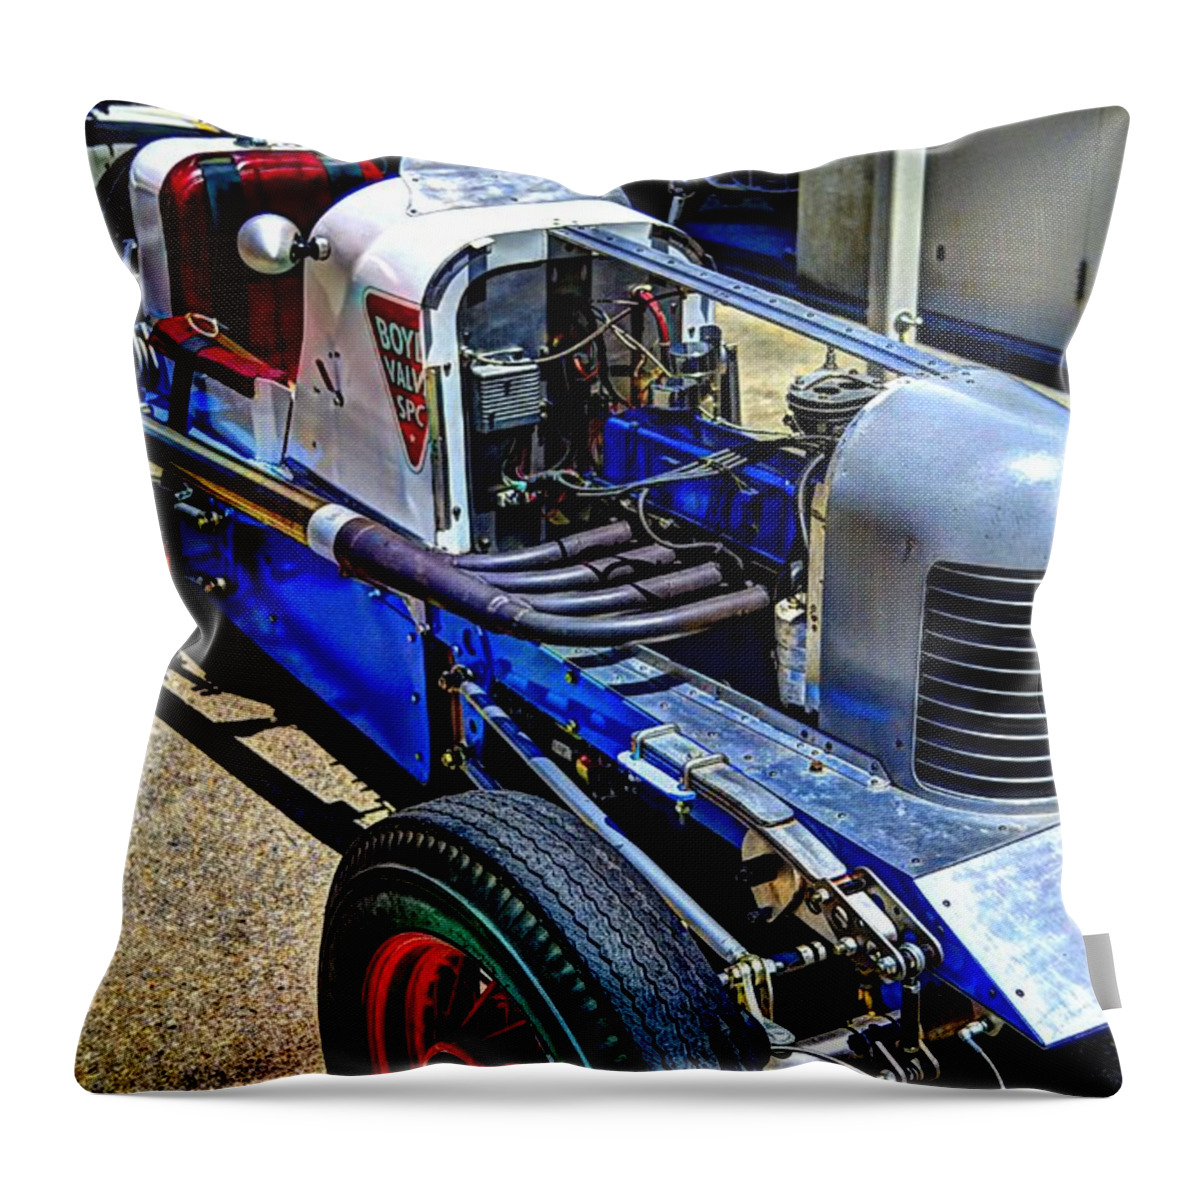 Josh Williams Throw Pillow featuring the photograph Boyle Valve Special Power by Josh Williams